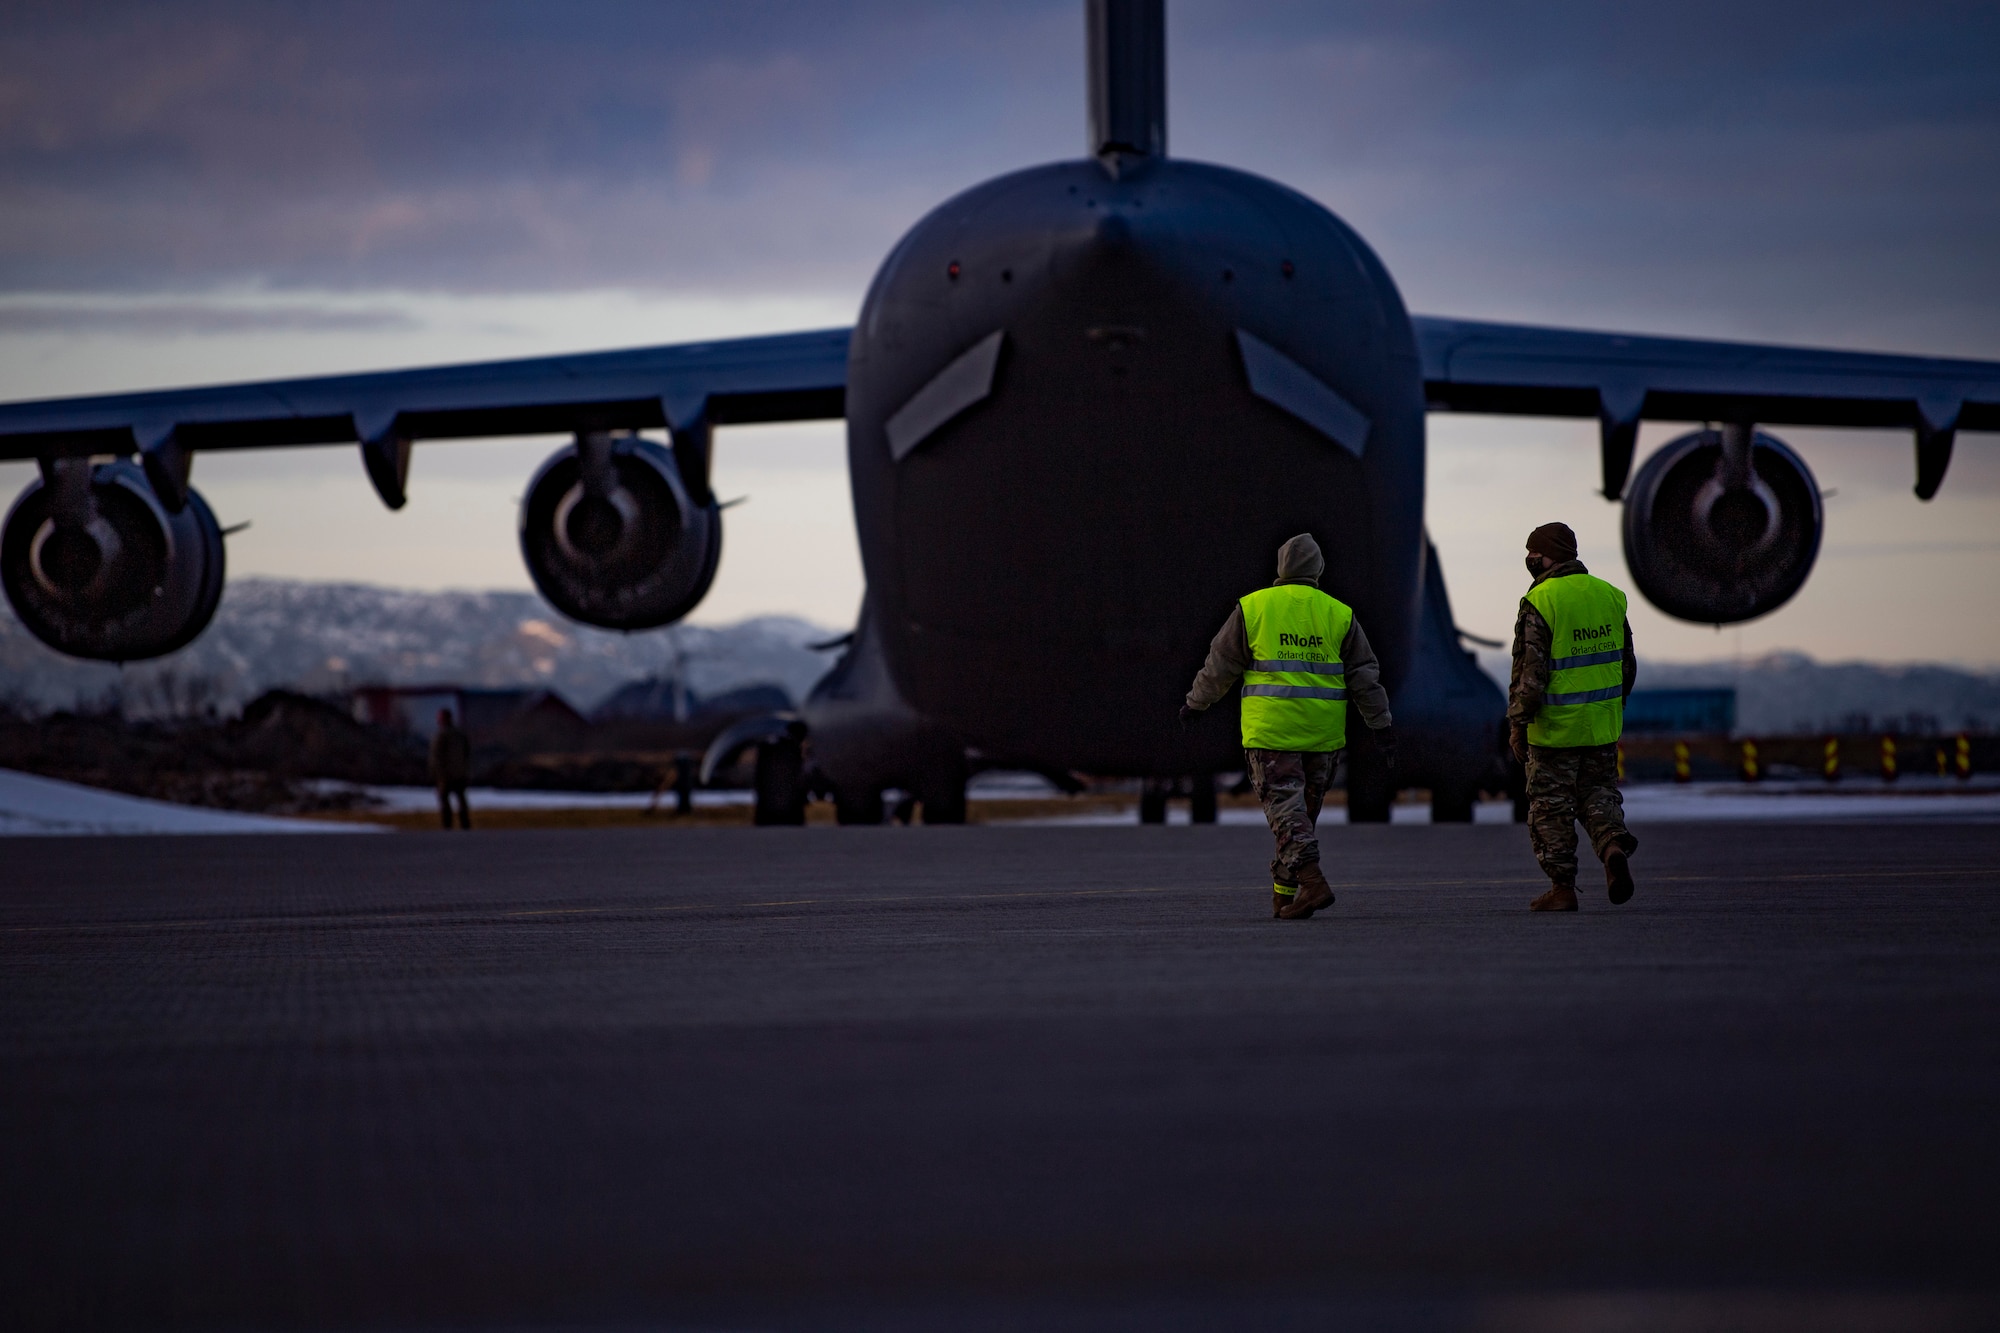 Airmen assigned to the 9th Expeditionary Bomb Squadron walk toward a C-17 Globemaster III, assigned to the 437th Airlift Wing, on the flightline at Ørland Air Force Station, Norway, Feb. 23, 2021. The C-17 provided logistic support for cargo needed to perform Bomber Task Force missions throughout the European theater. (U.S. Air Force photo by Airman First Class Colin Hollowell)